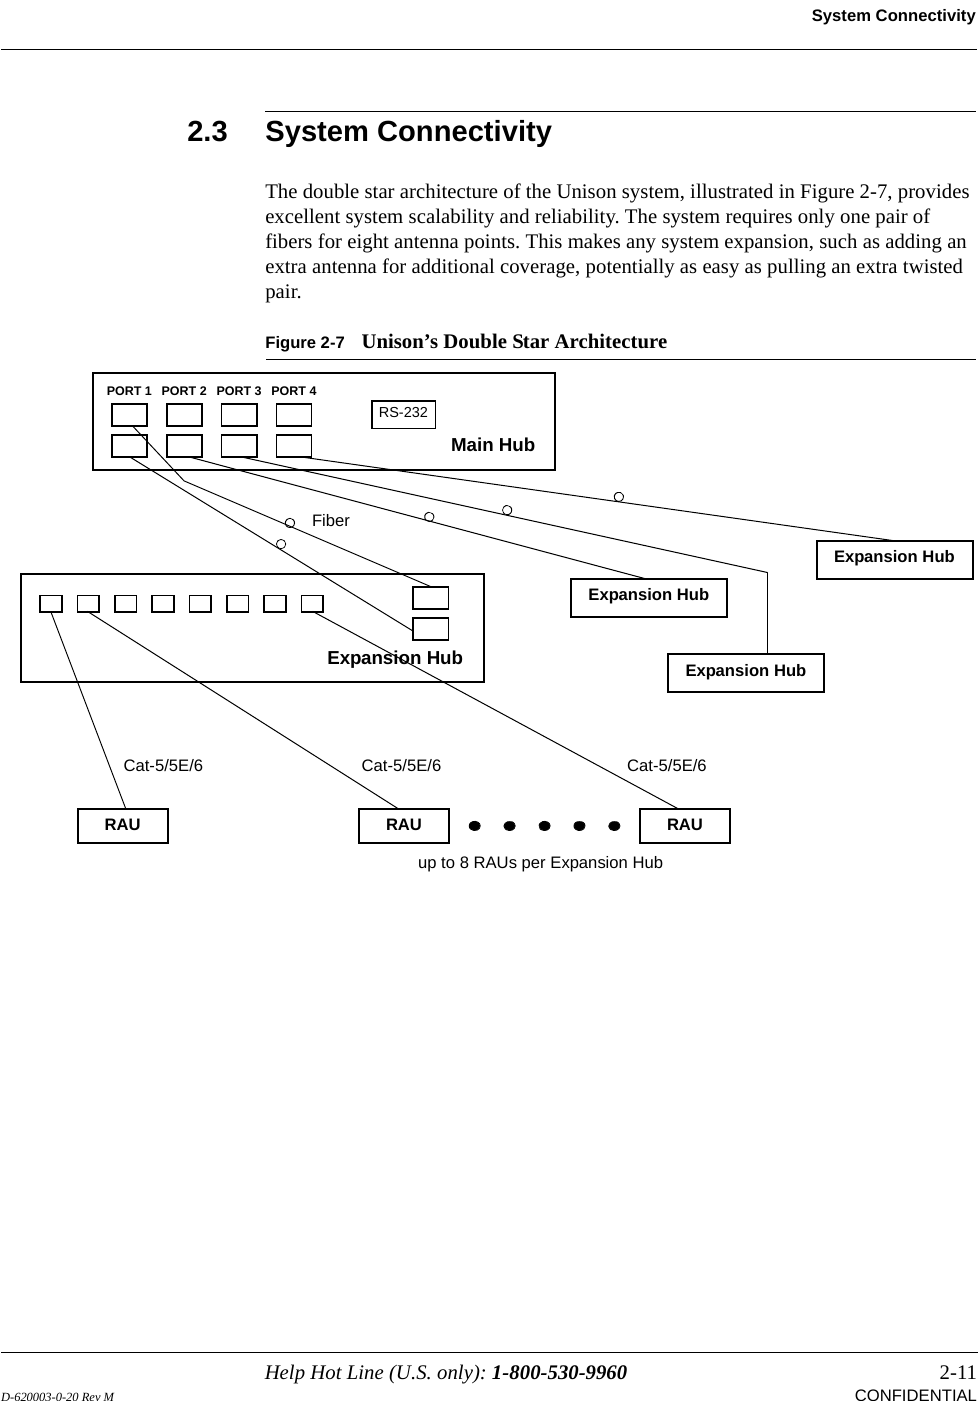 Help Hot Line (U.S. only): 1-800-530-9960 2-11D-620003-0-20 Rev M  CONFIDENTIALSystem Connectivity2.3 System ConnectivityThe double star architecture of the Unison system, illustrated in Figure 2-7, provides excellent system scalability and reliability. The system requires only one pair of fibers for eight antenna points. This makes any system expansion, such as adding an extra antenna for additional coverage, potentially as easy as pulling an extra twisted pair.Figure 2-7 Unison’s Double Star ArchitectureMain HubRS-232PORT 1 PORT 2 PORT 3 PORT 4Expansion Hub Expansion HubFiberExpansion HubExpansion HubCat-5/5E/6Cat-5/5E/6 Cat-5/5E/6up to 8 RAUs per Expansion HubRAU RAU RAU